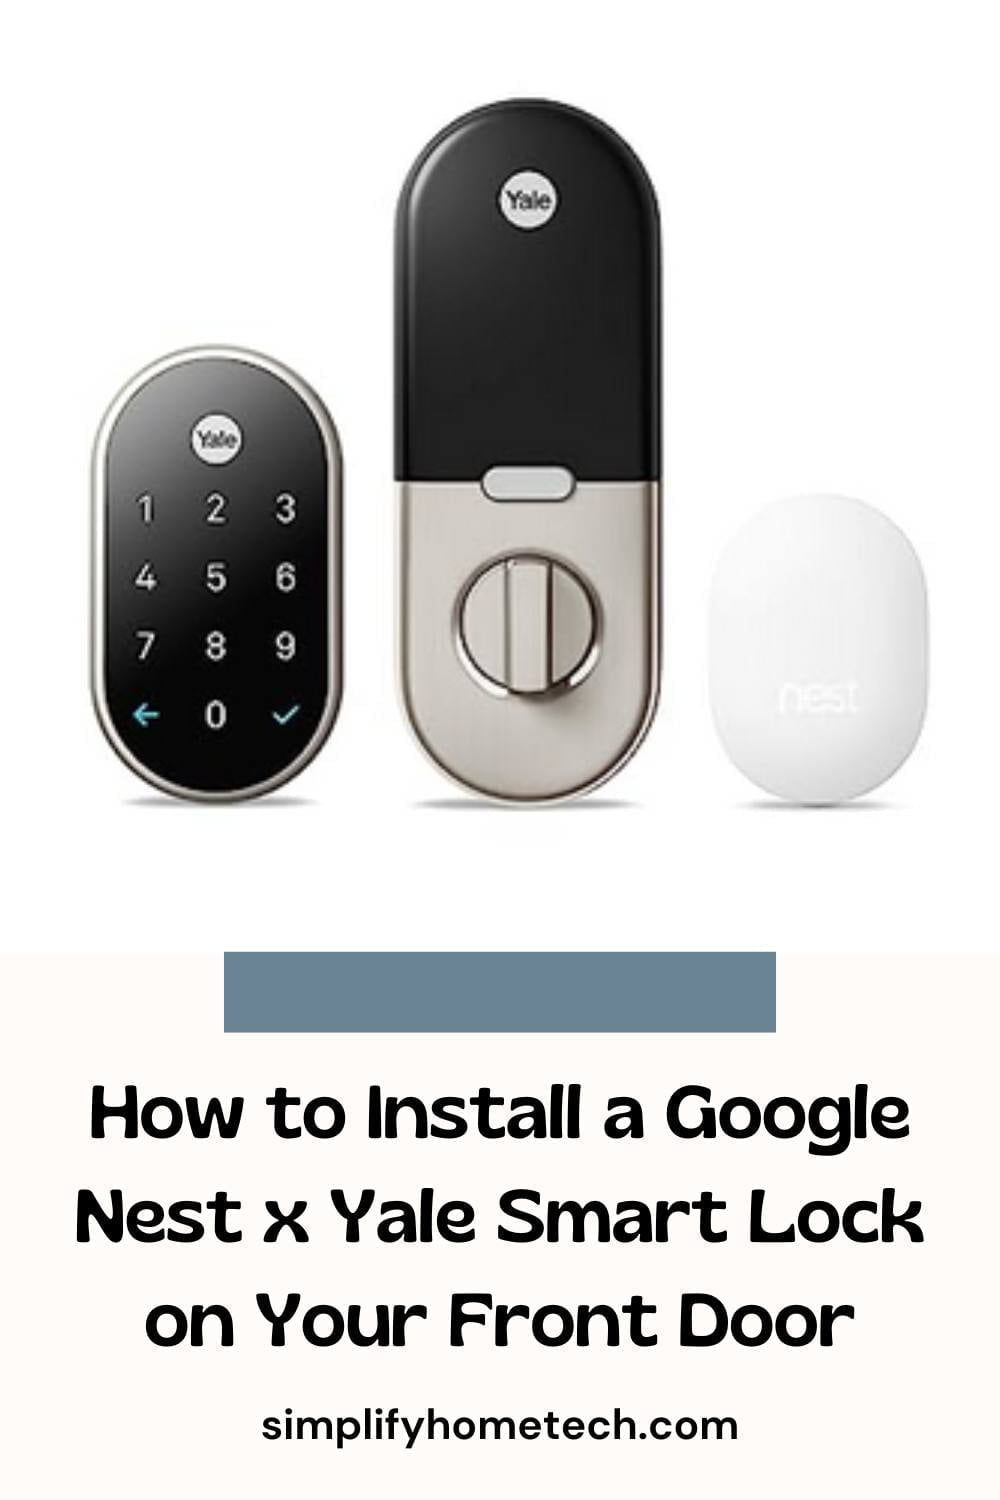 How to Install Google Nest x Yale Smart Lock on Front Door